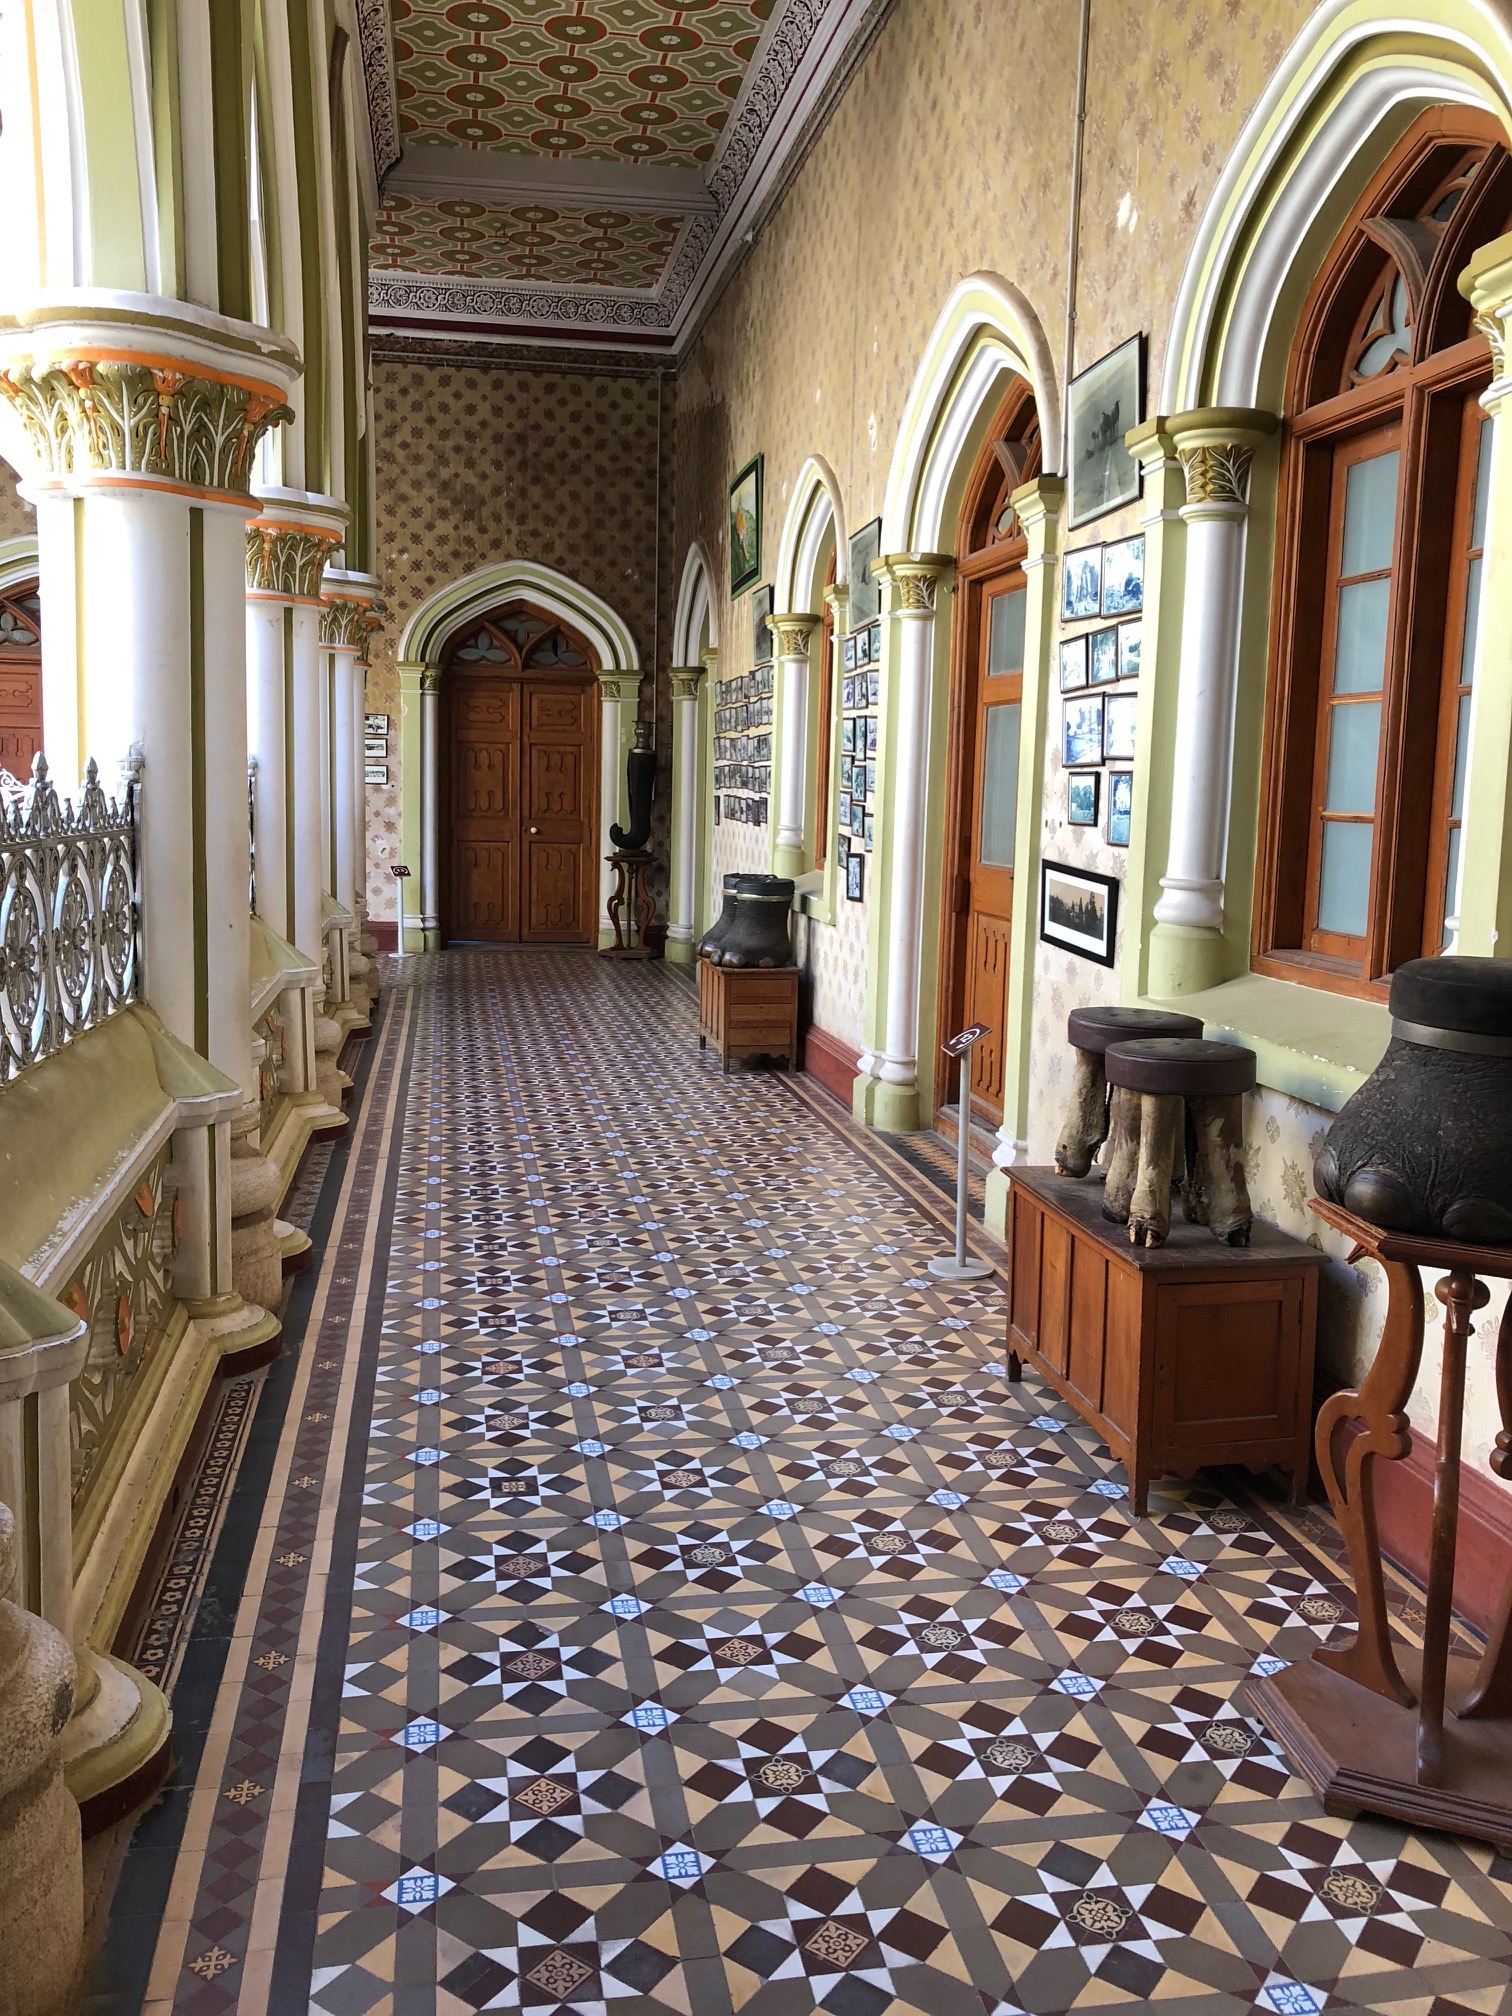 A mosaic-floored hall overlooks a square.  Stools made from the feet of  elephants and other animals sit on benches, on display.